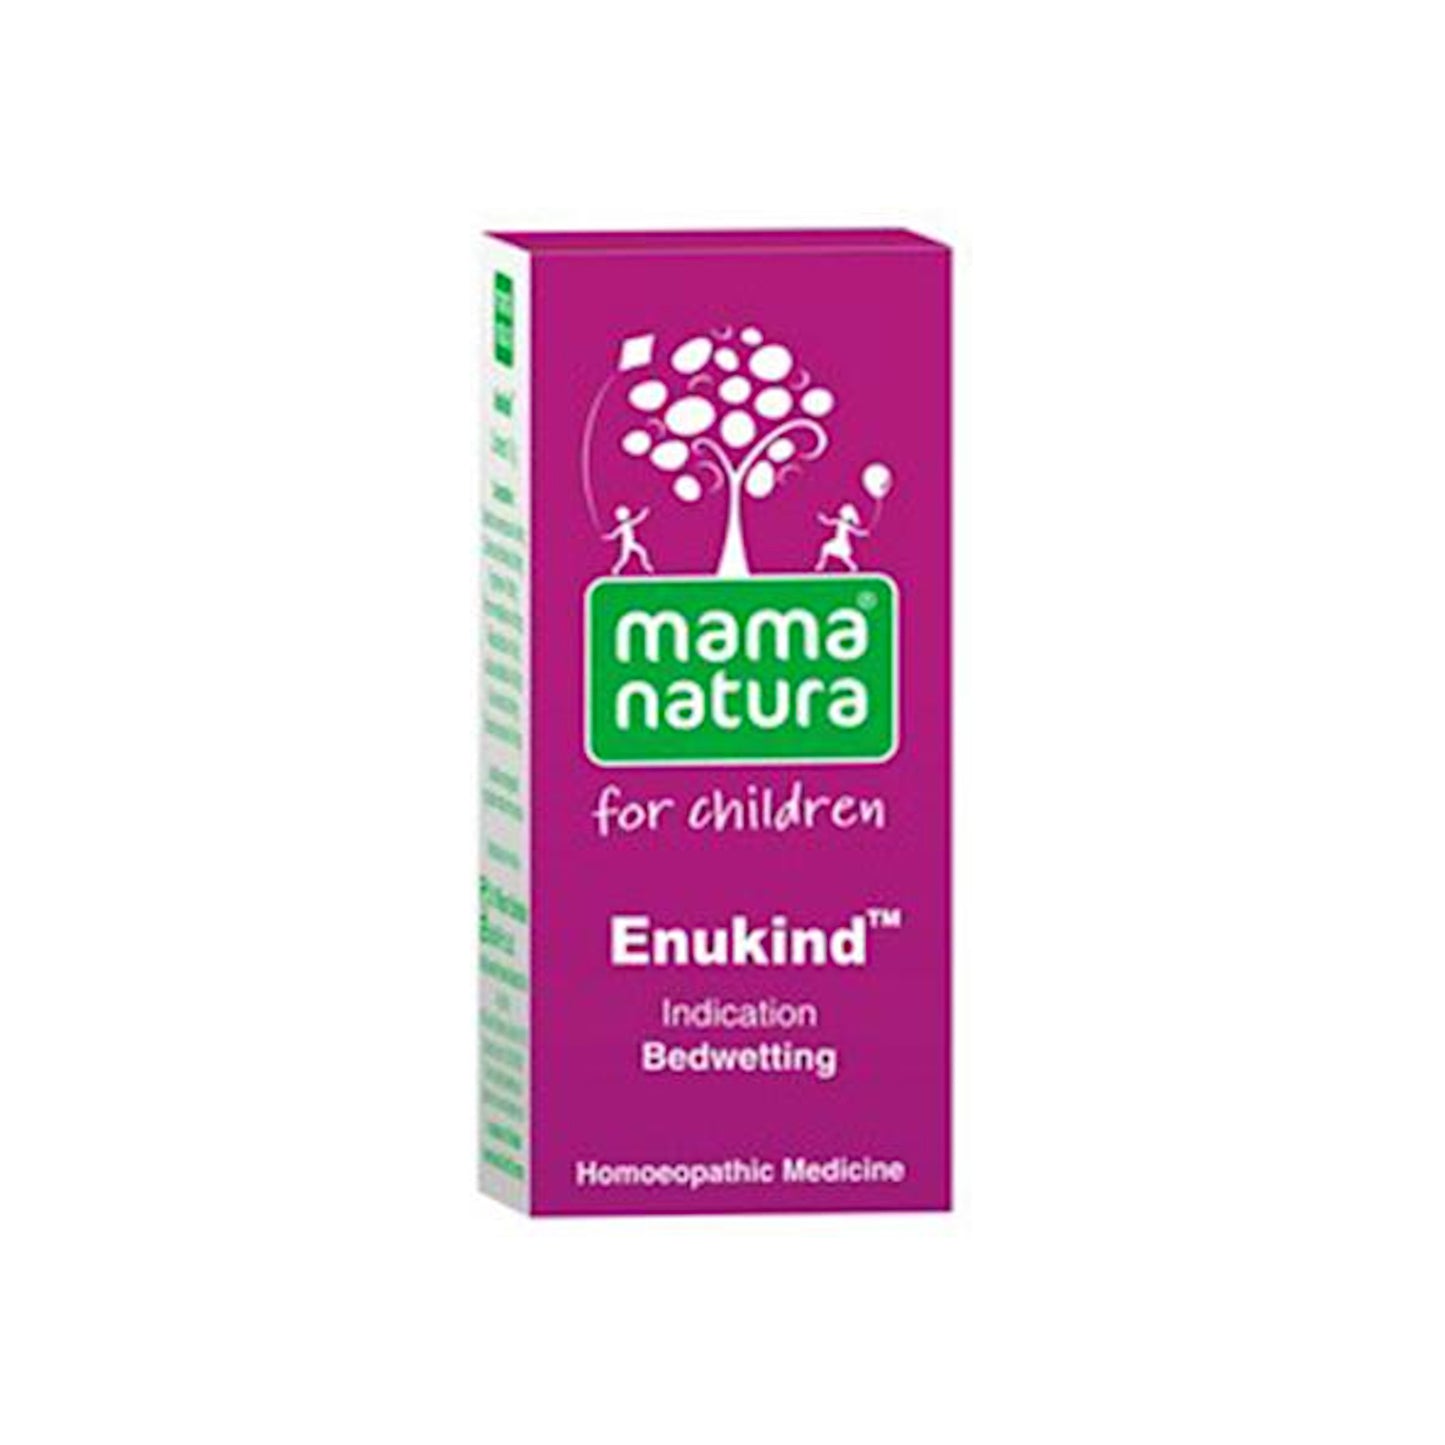 Image: Enukind Globules by Dr. Schwabe Homeopathy 10 g - A solution for frequent urination, bedwetting, and emotional well-being.